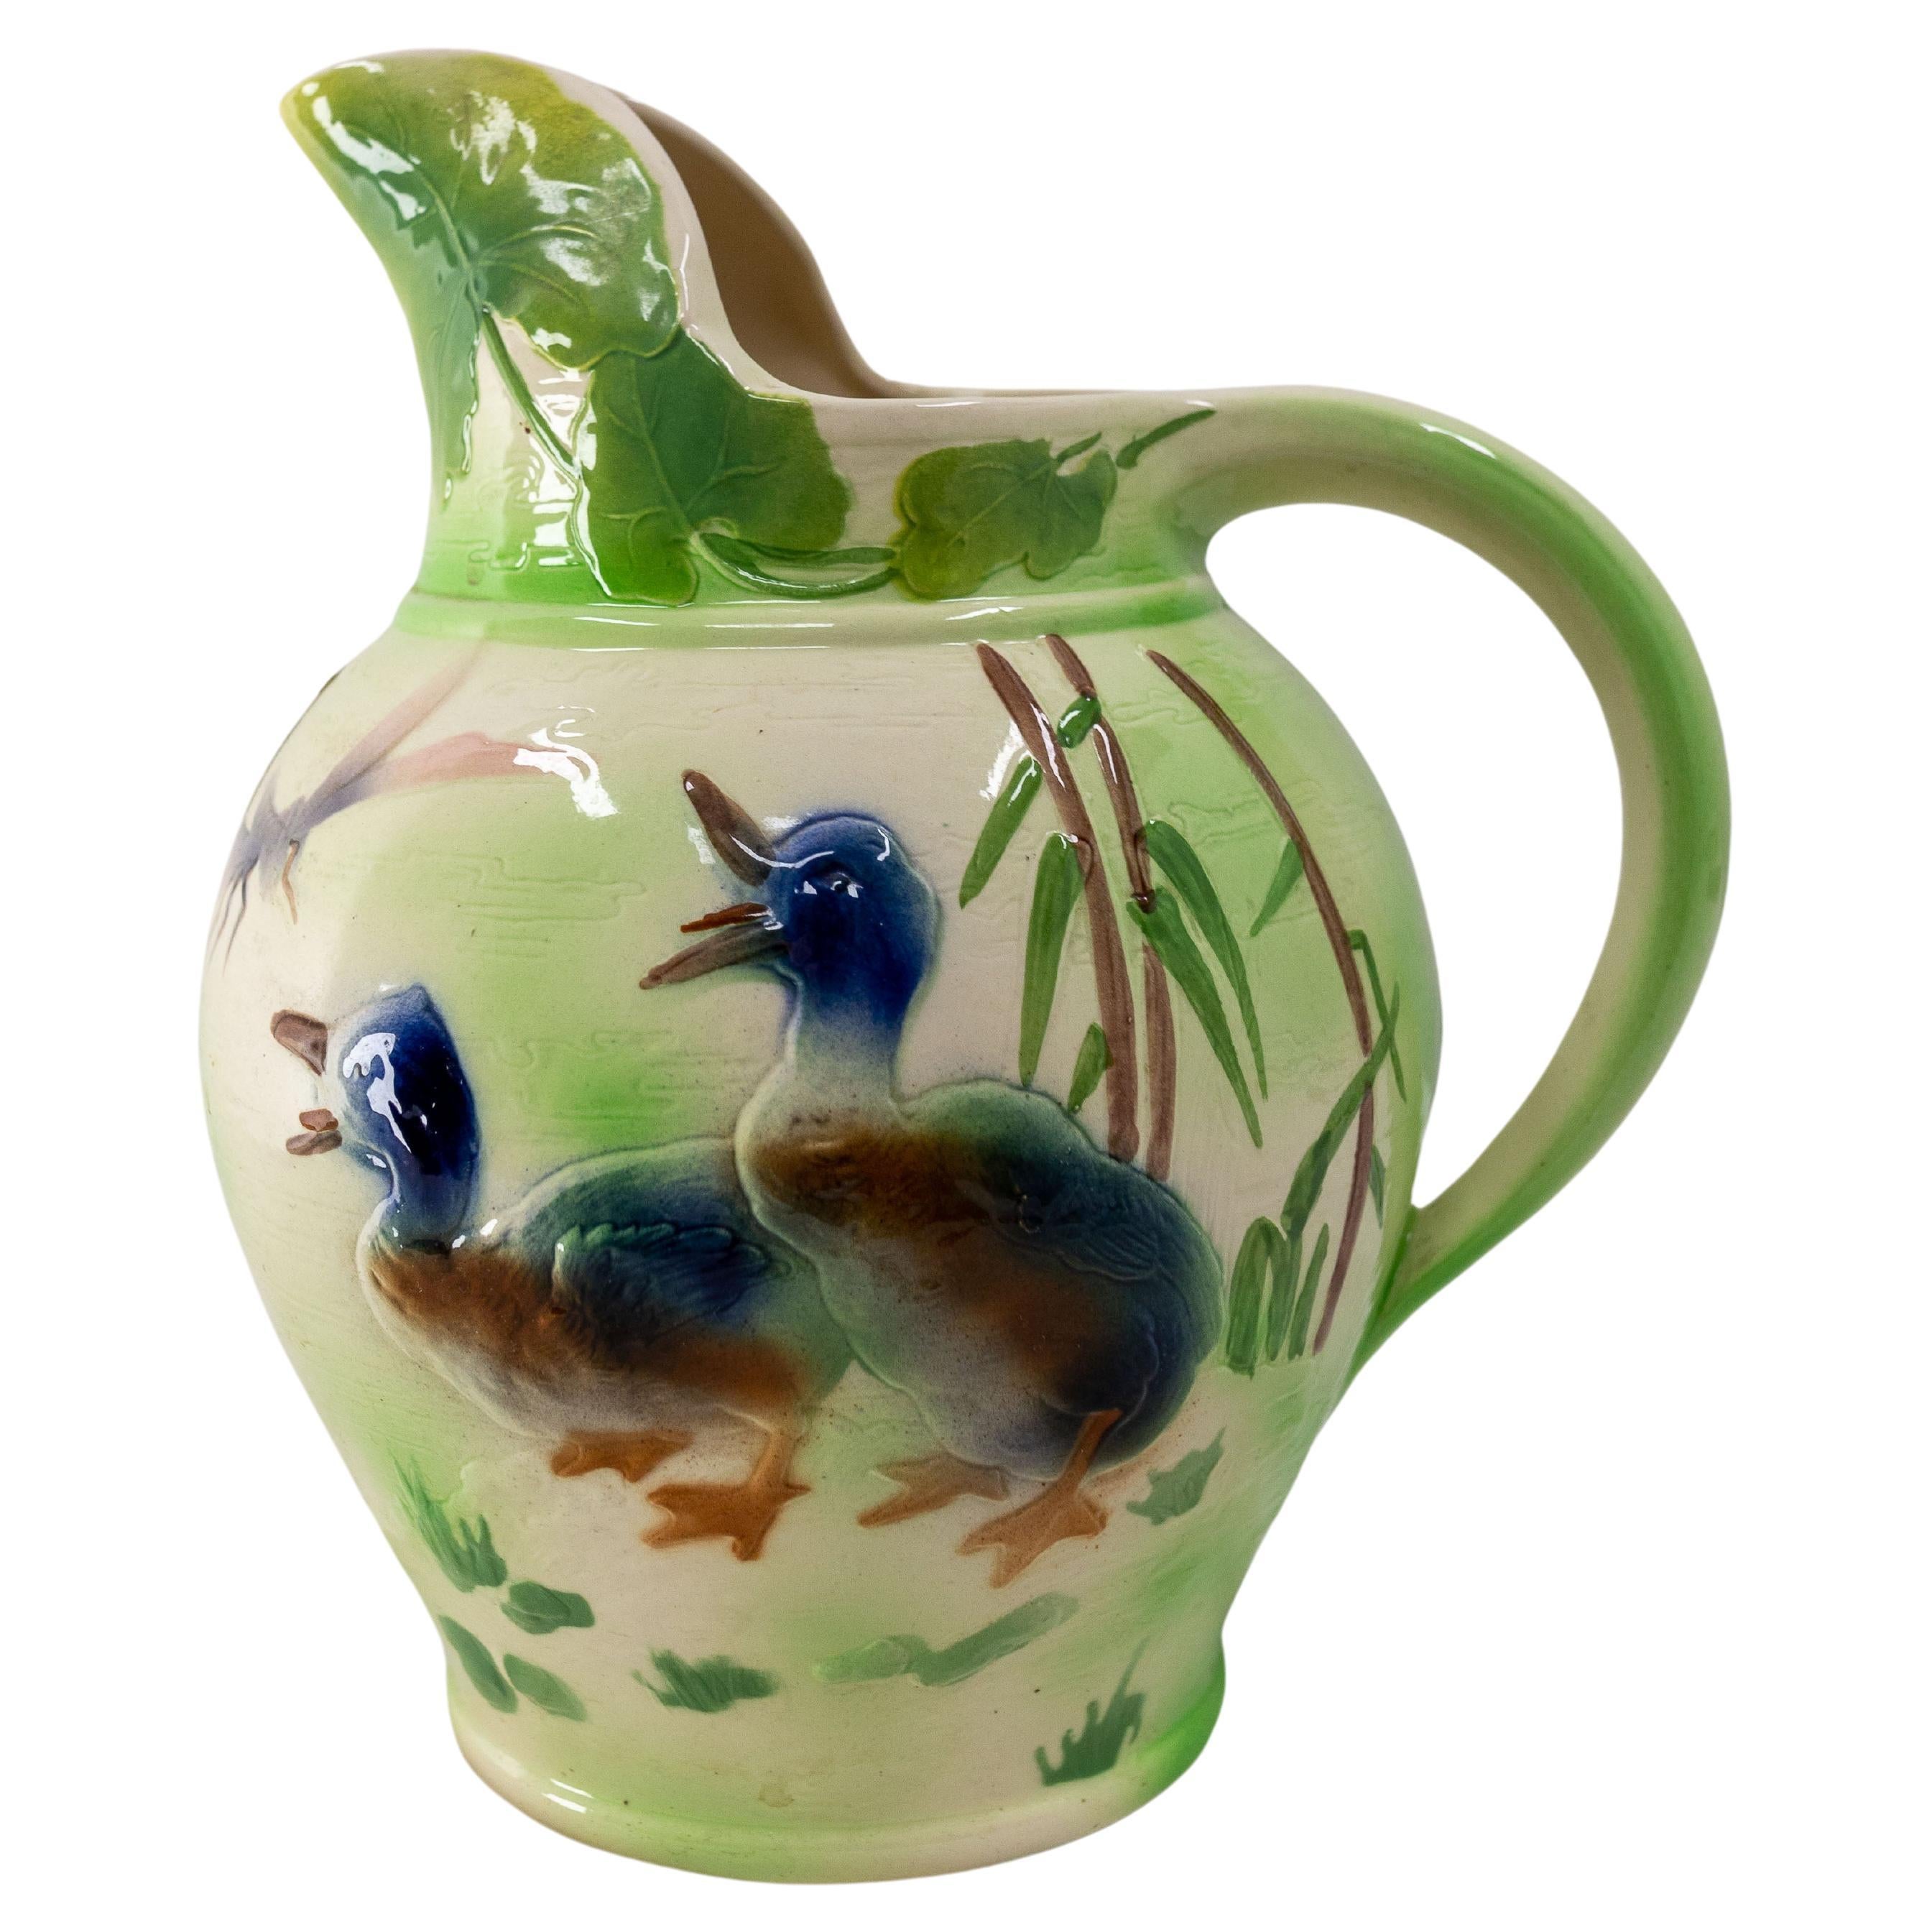 French Saint Clément Barbotine Pitcher with Ducks, Midcentury